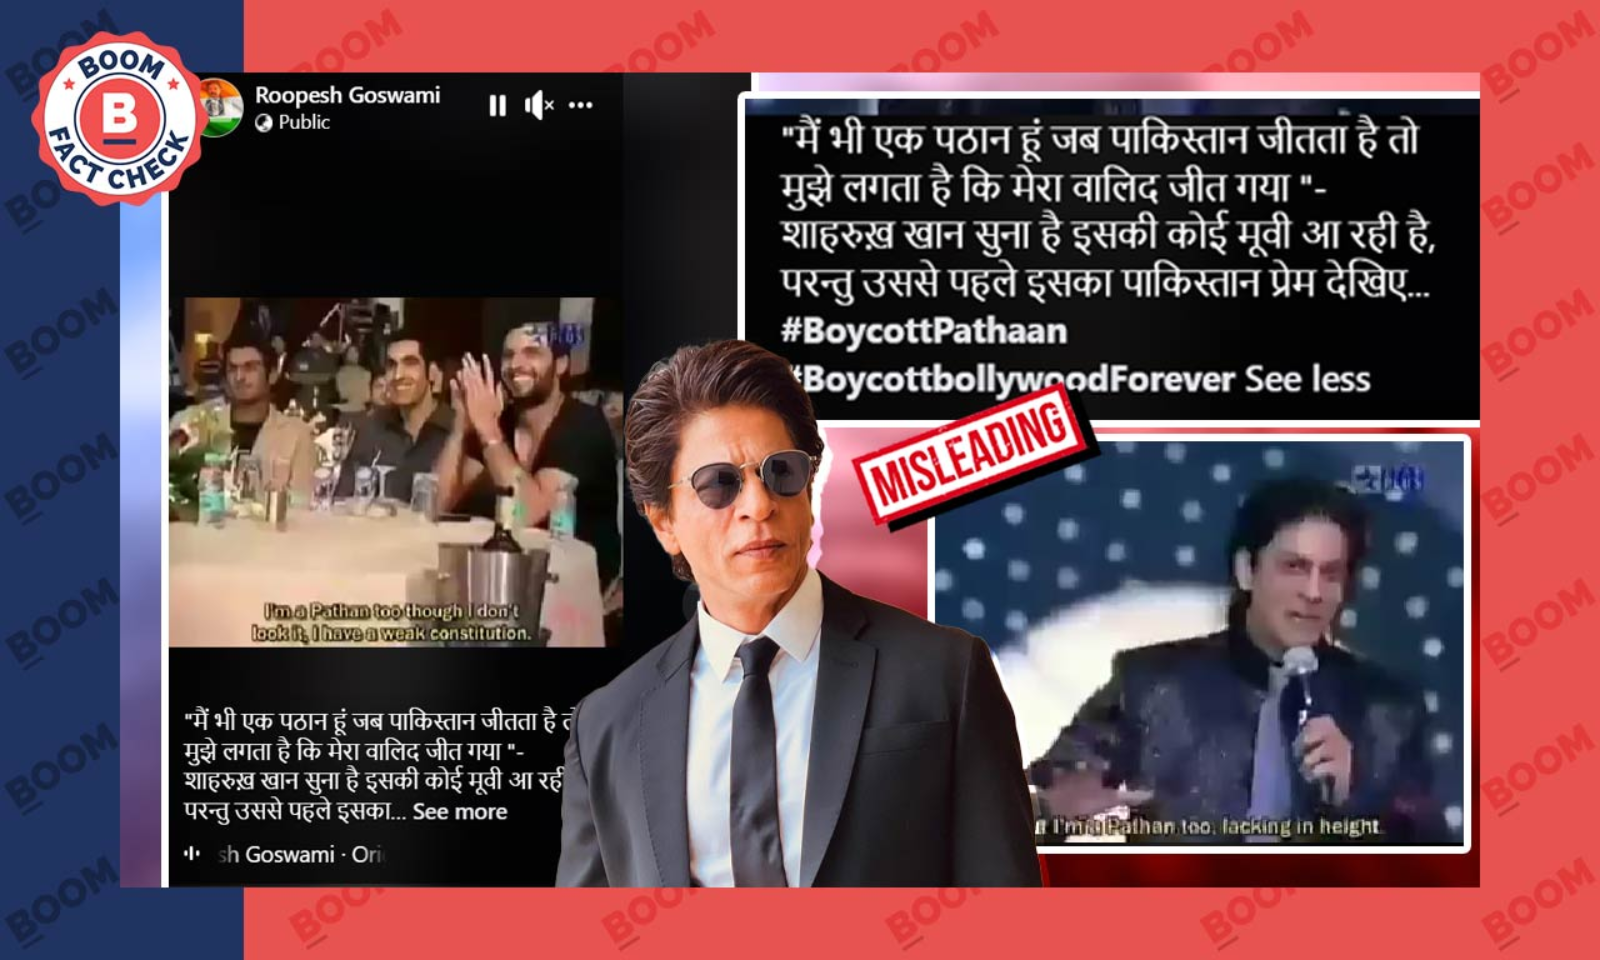 Fact Check: Old and edited picture of Shahrukh Khan viral with the